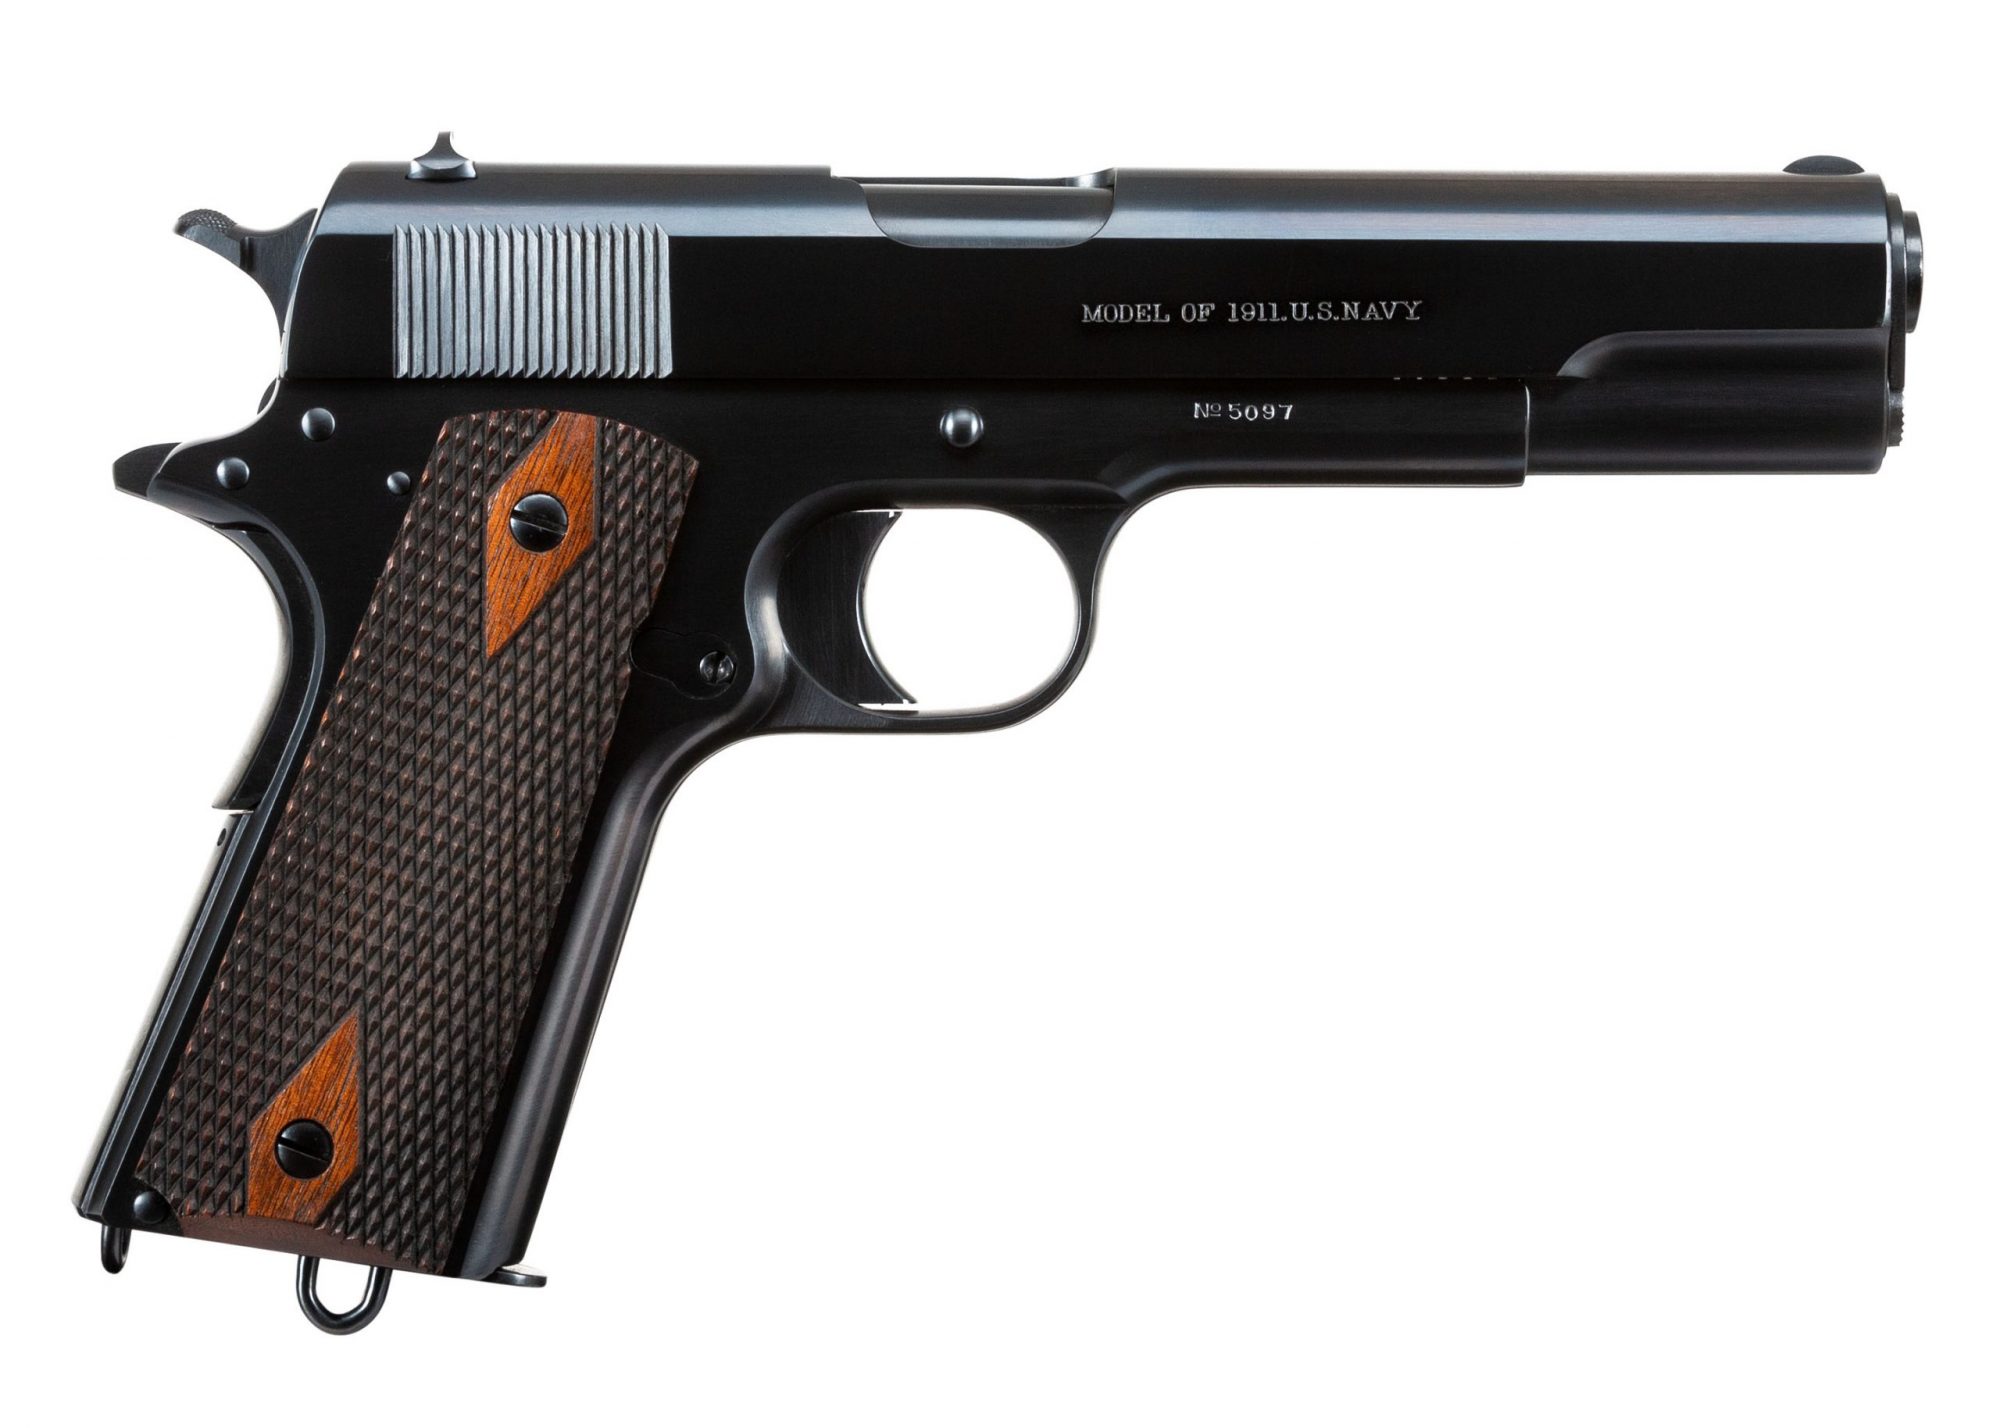 Photo of a restored Colt 1911 Navy from 1912, by Turnbull Restoration of Bloomfield, NY